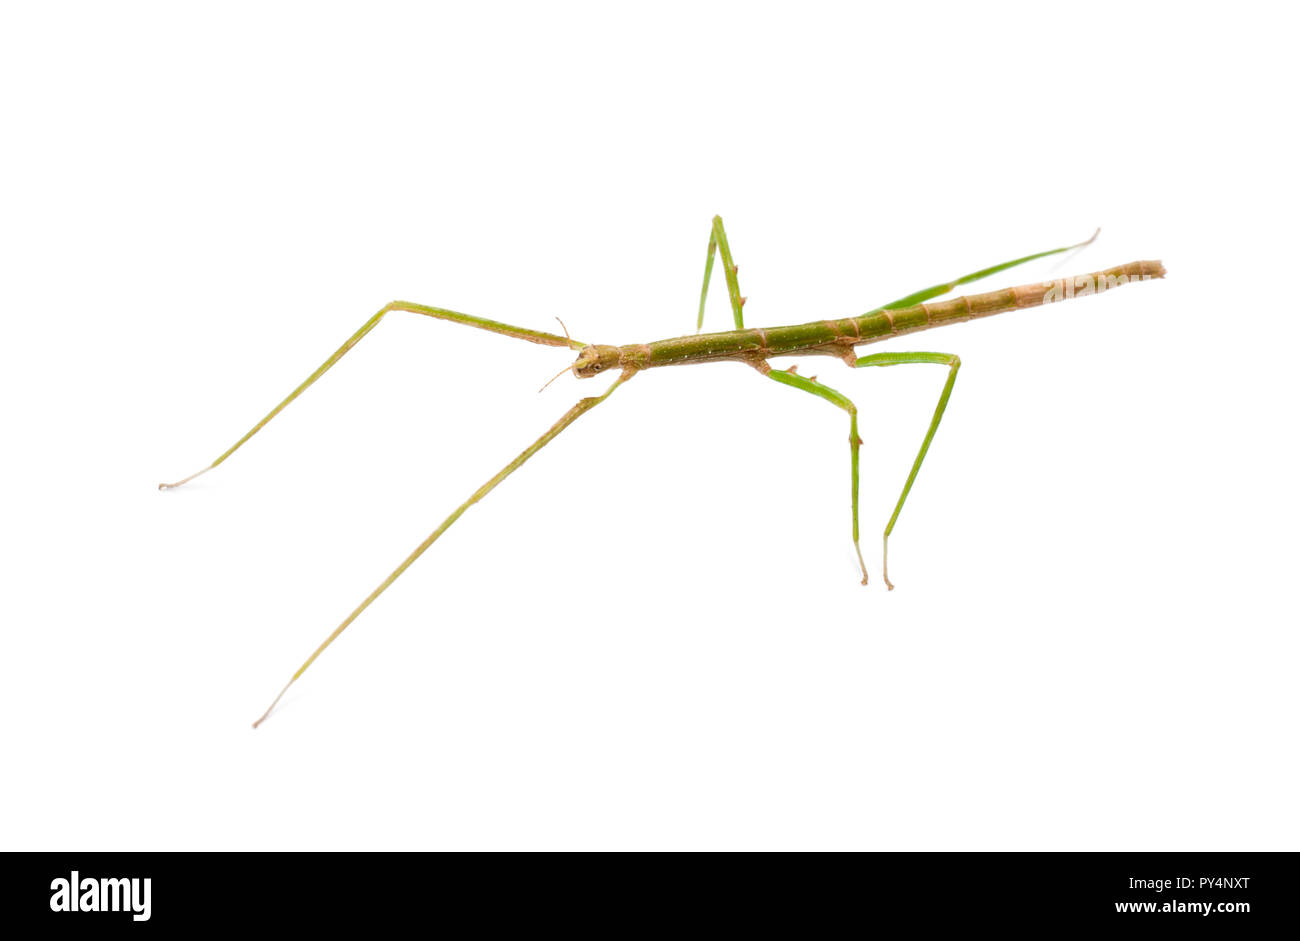 Indian Stick Insect, Carausius morosus also known as a Laboratory Stick Insect, standing against white background Stock Photo